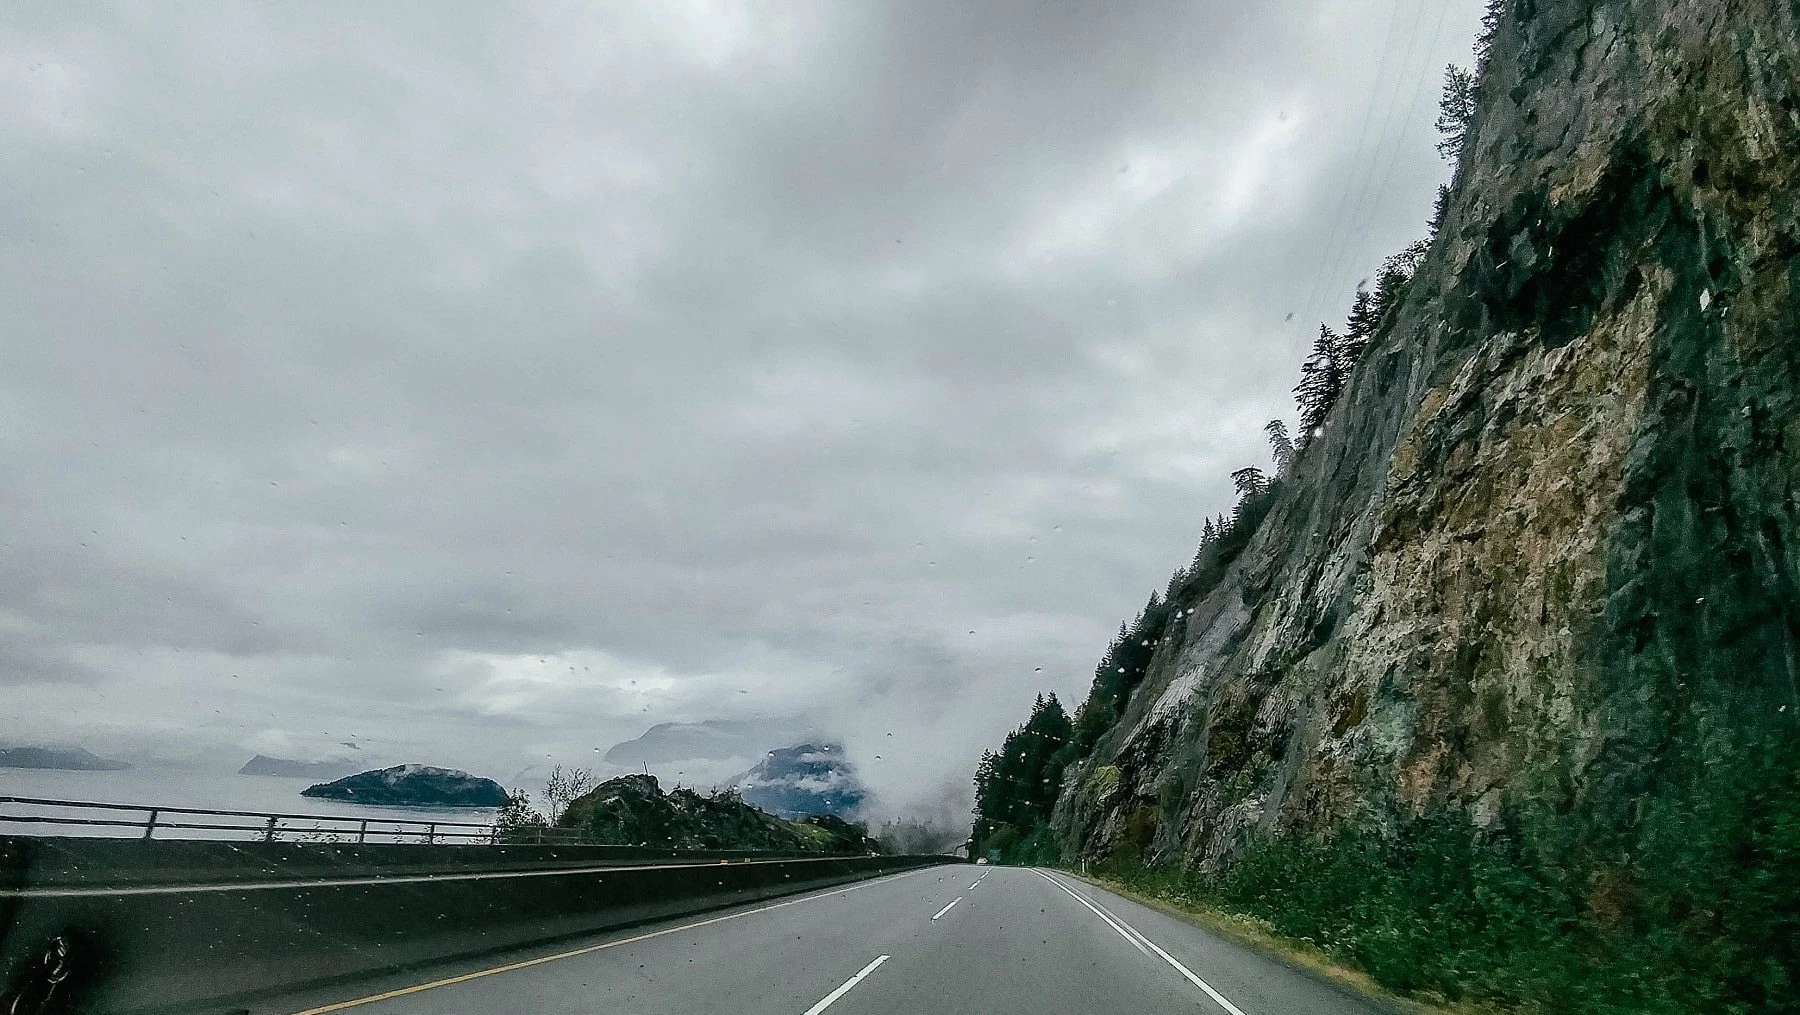 The Sea to Sky highway in Vancouver